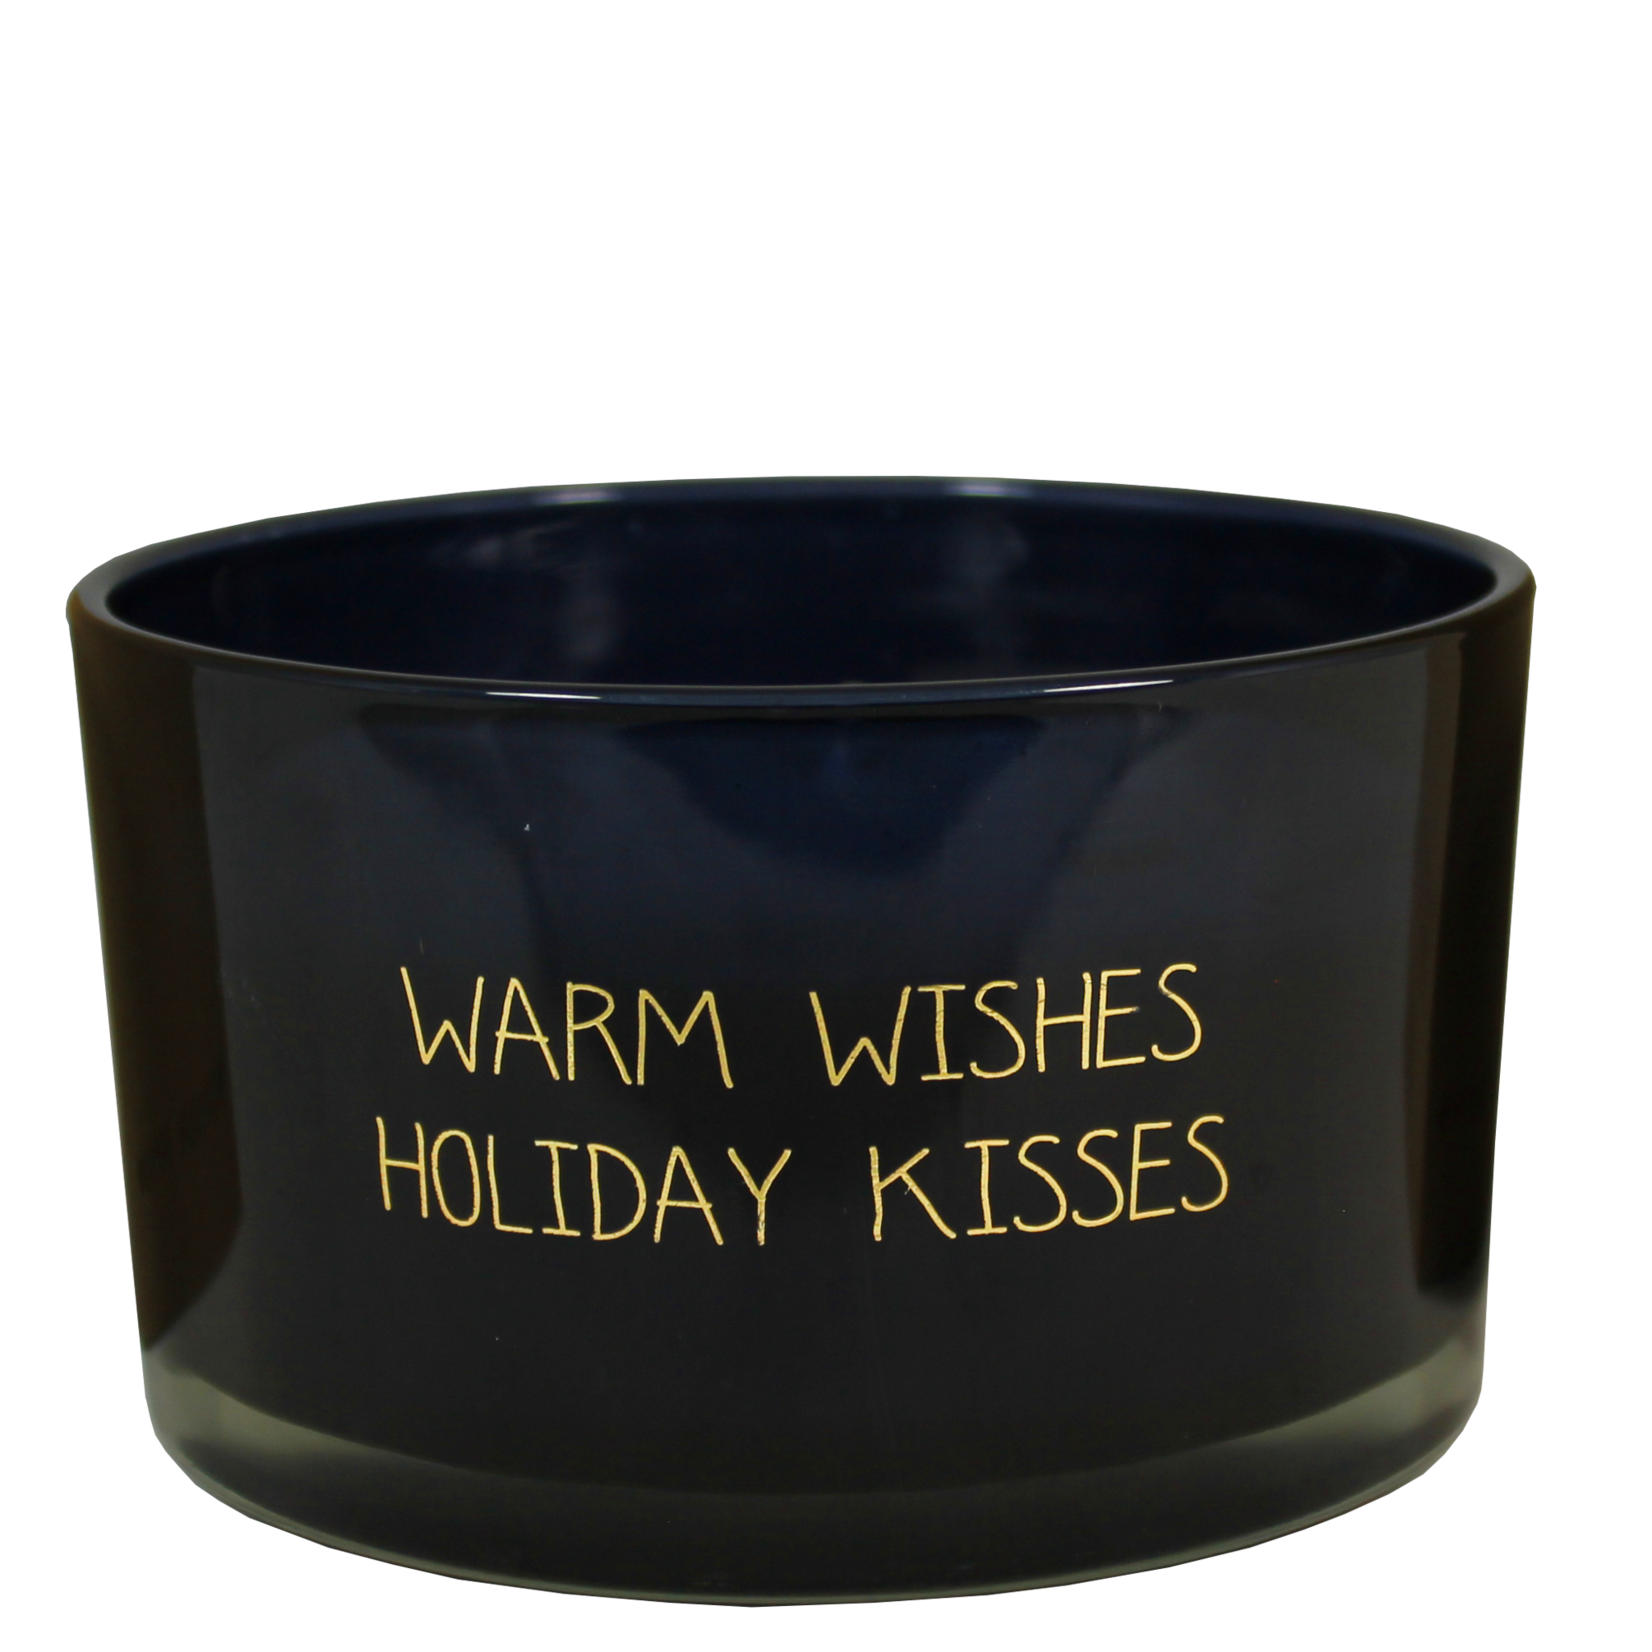 My Flame Sojakaars - Warm wishes and holiday kisses - Winter Glow